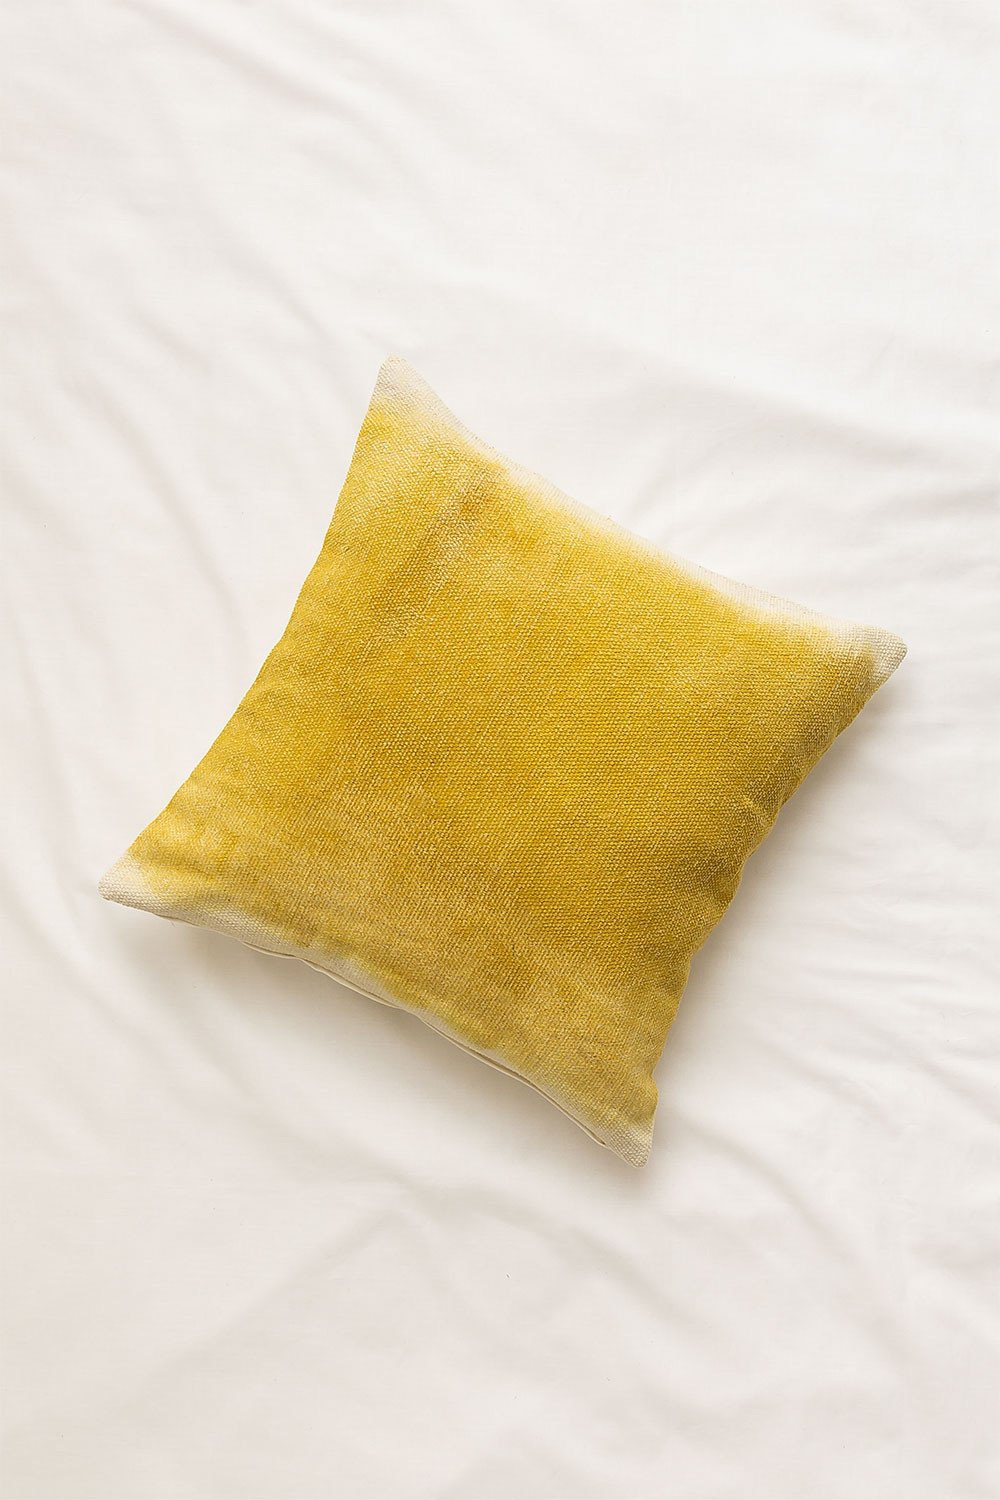 Square Cushion Cover  ( 50 x 50 cm)  Lessy, gallery image 1